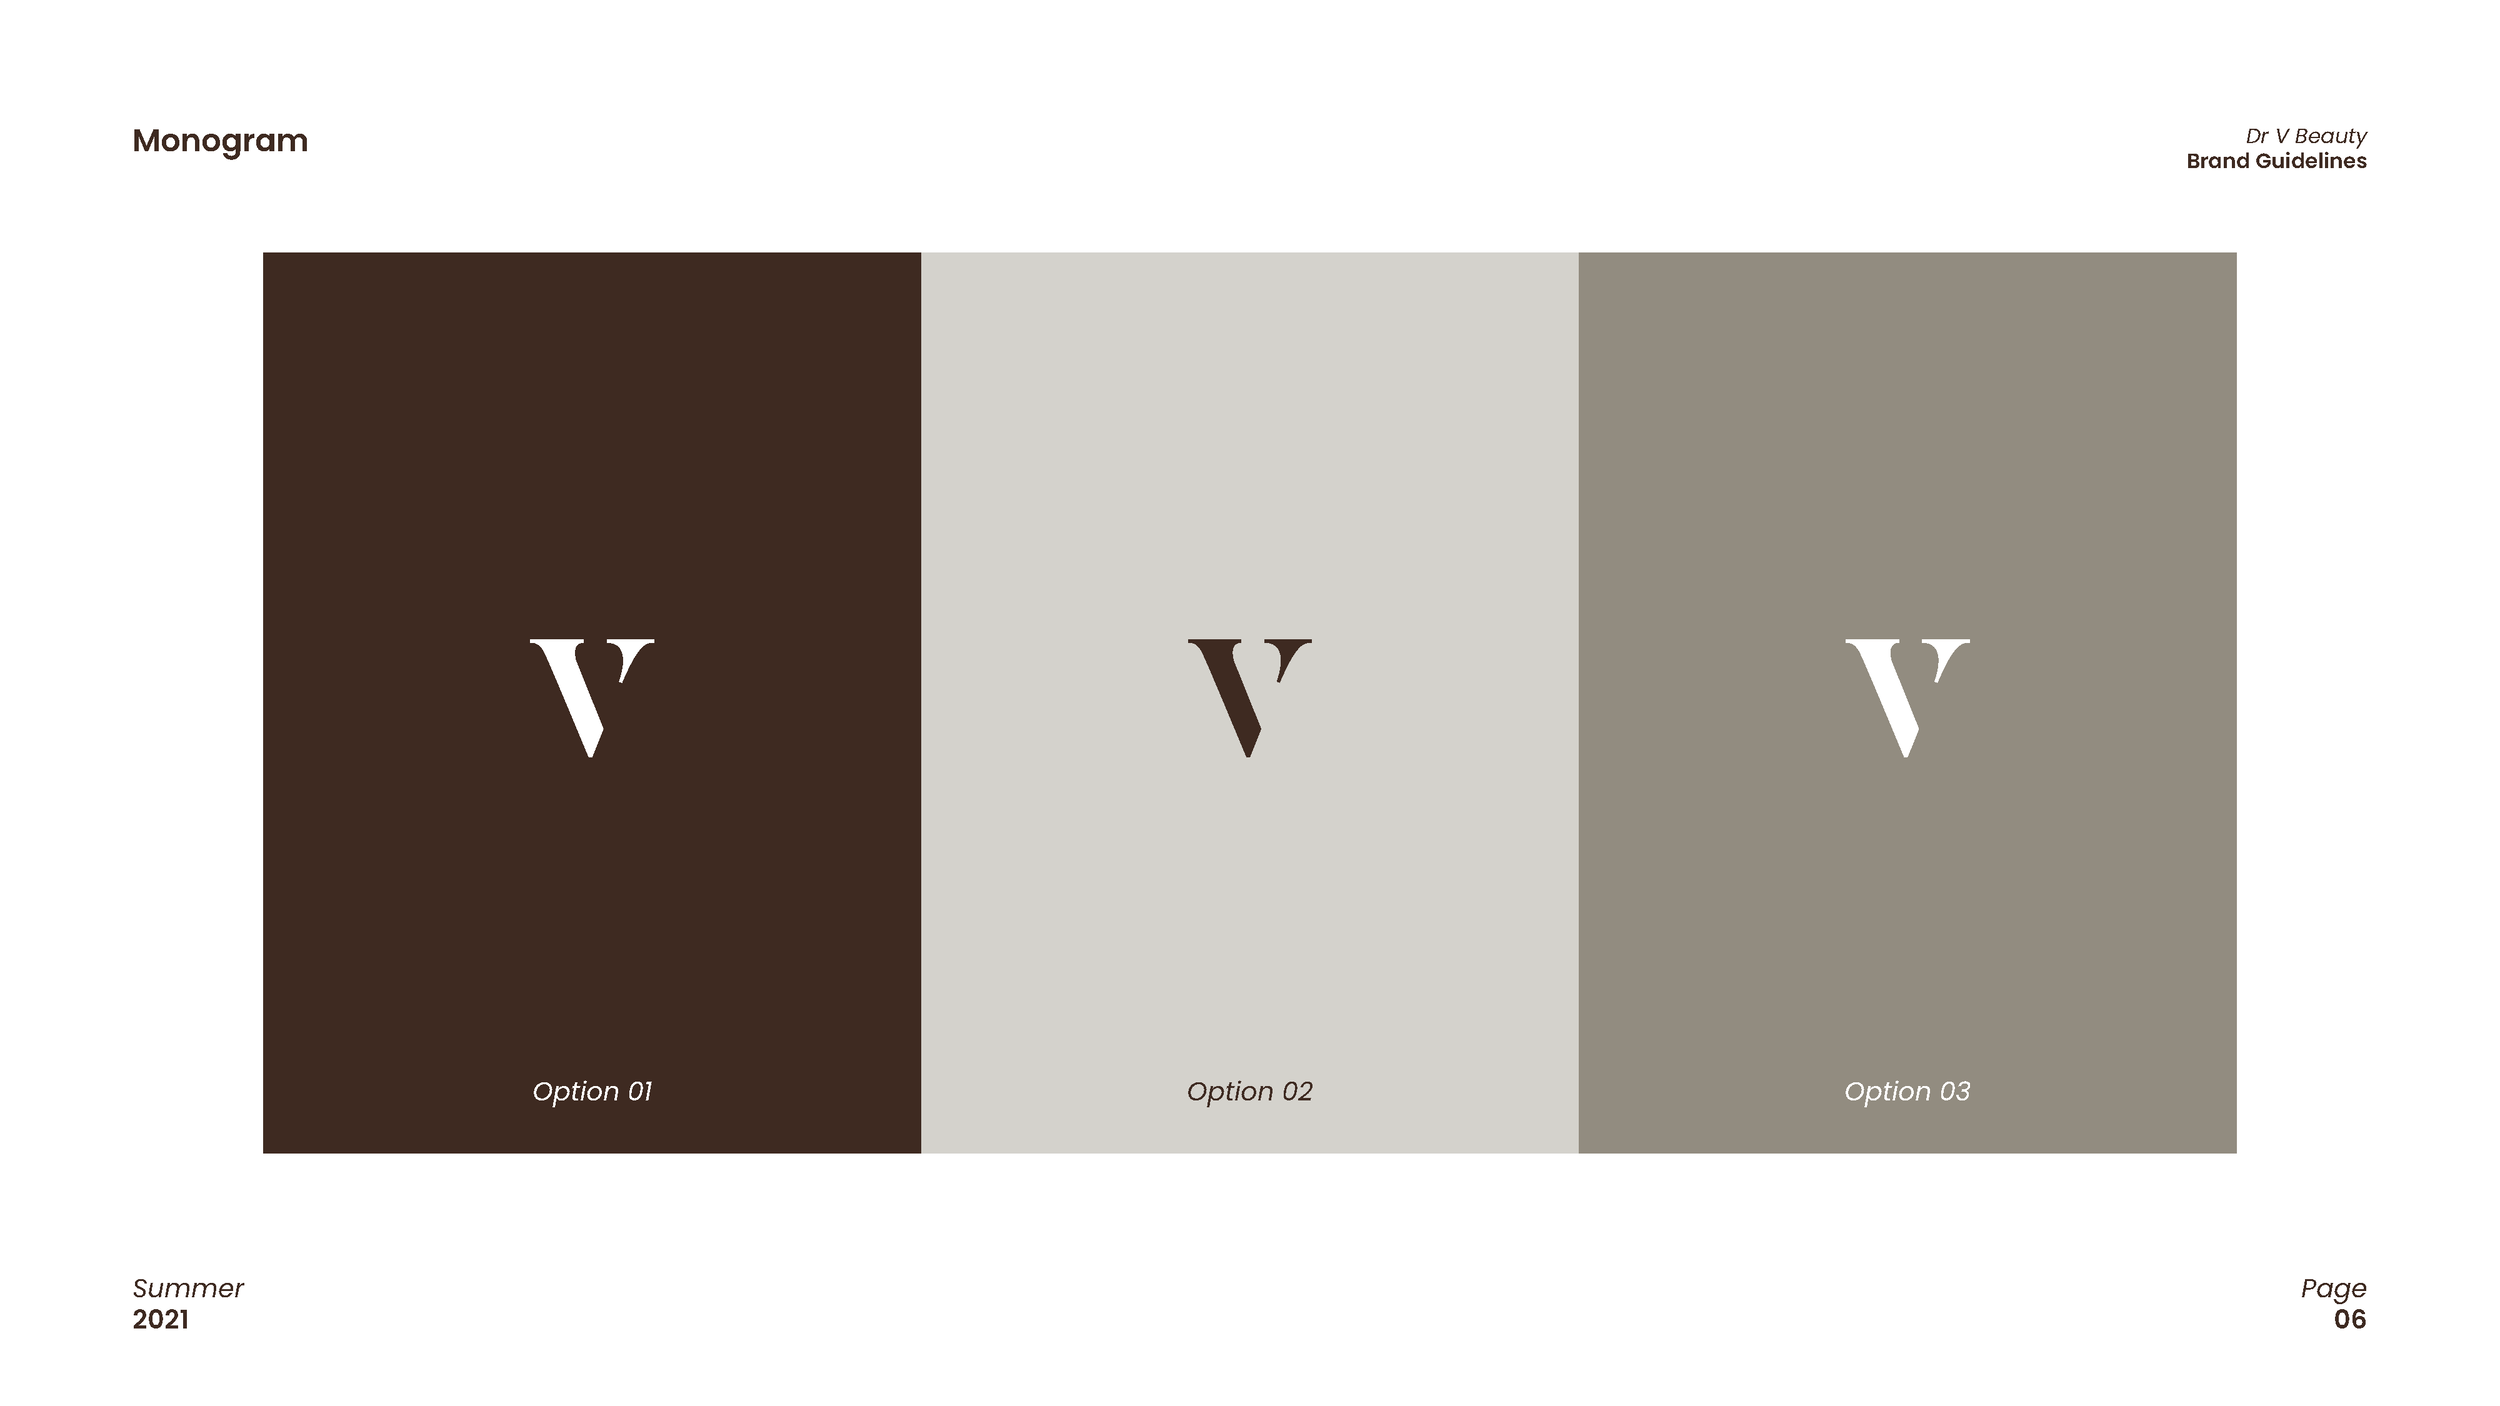 Dr V Beauty - Brand Guidelines_Page_06.png